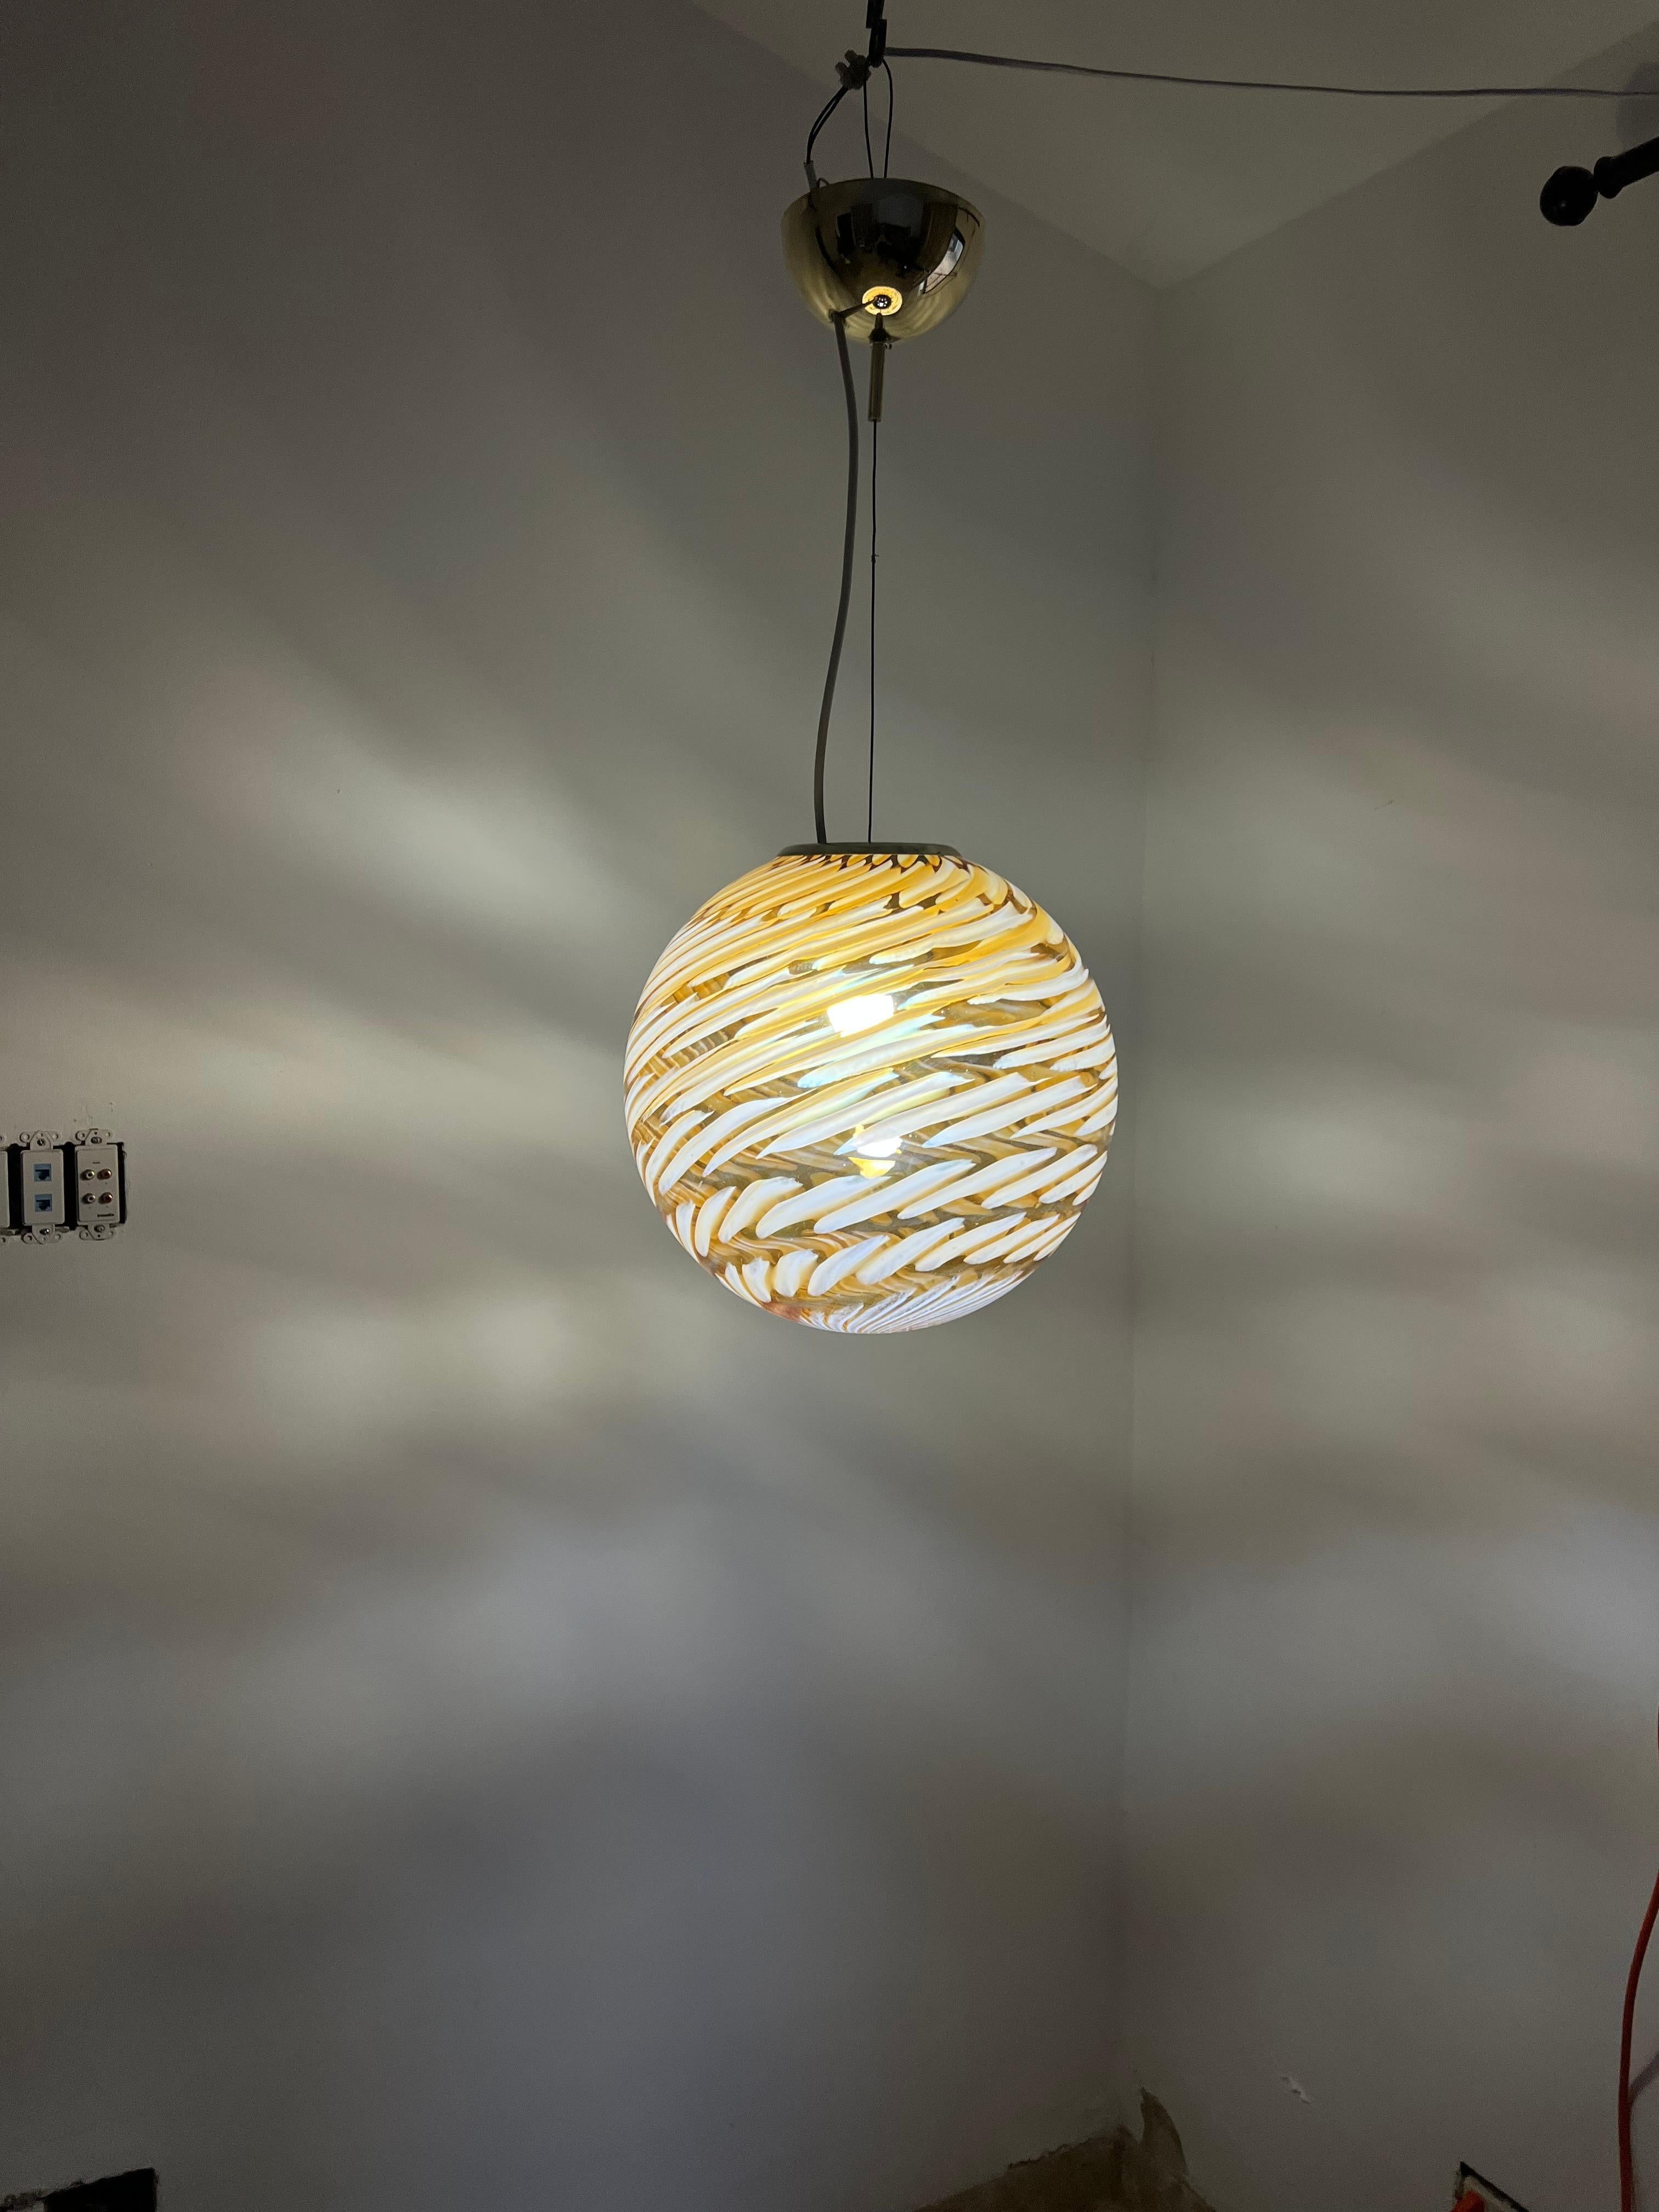 Mid-Century Modern sphere in Murano glass attributed to Venini.
The globe is made in clear, white, yellow and orange glass tones, catching the light differently according to the bulb used as shown in out photos.
Made in Murano Italy circa